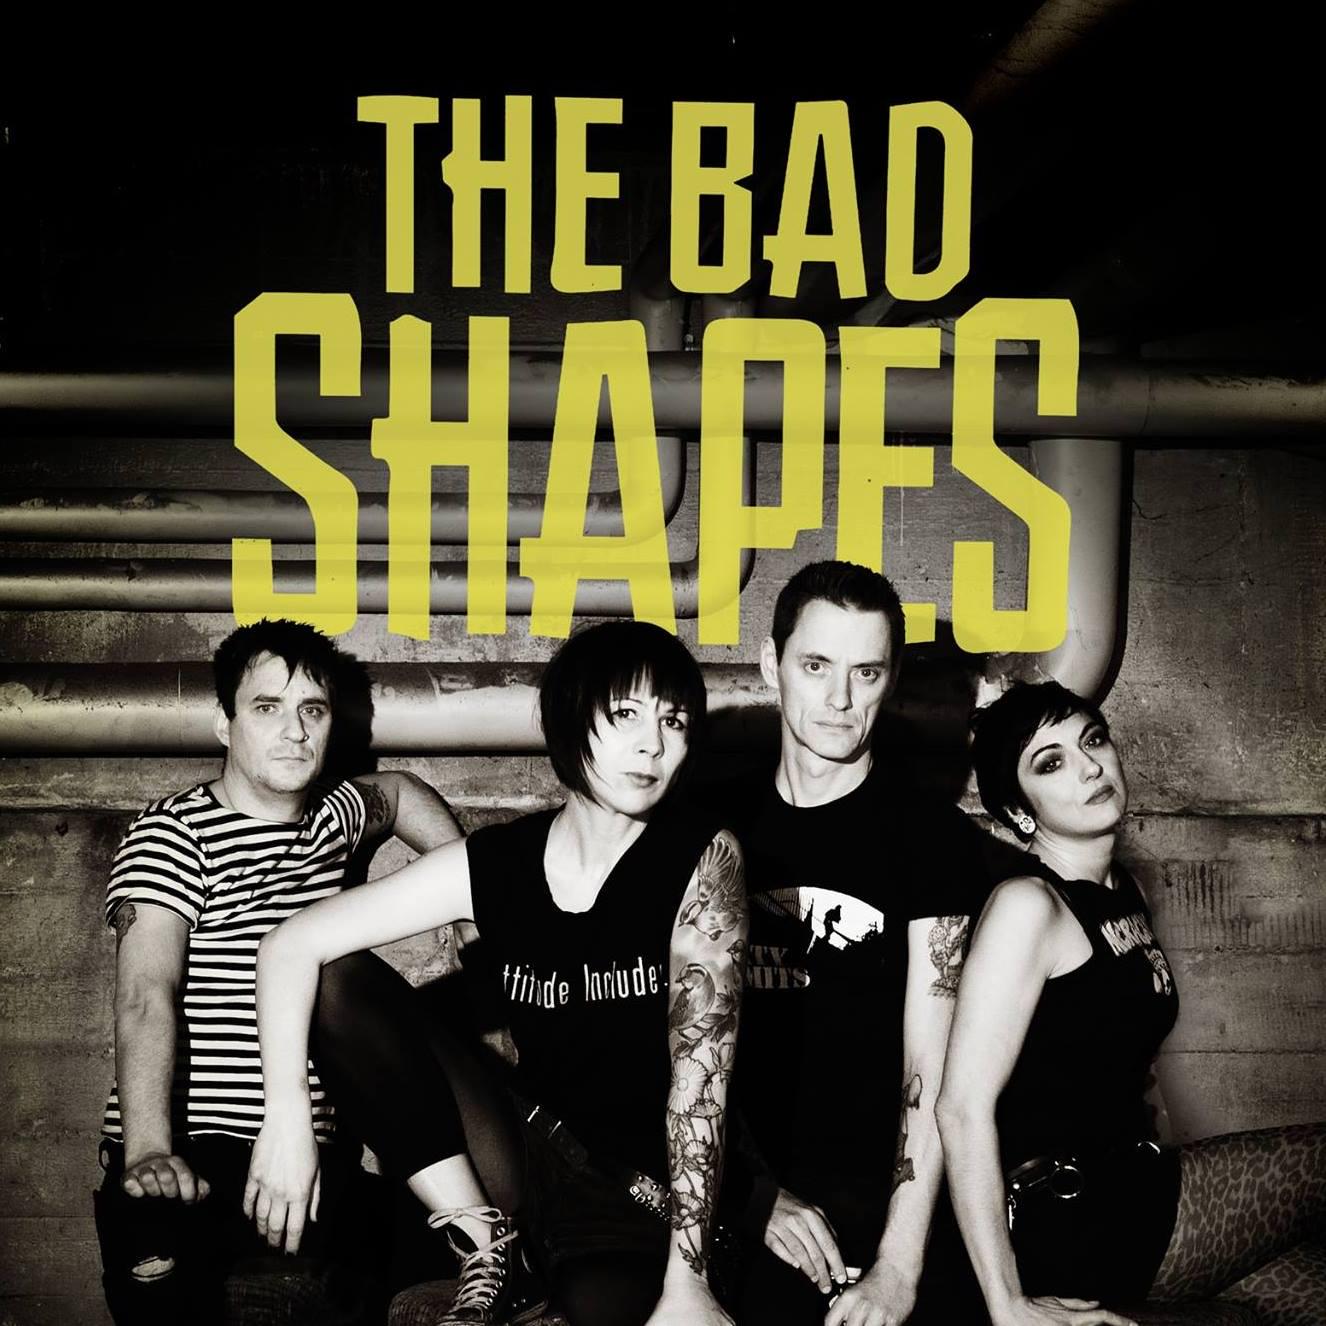 The Bad Shapes - Songs, Events and Music Stats